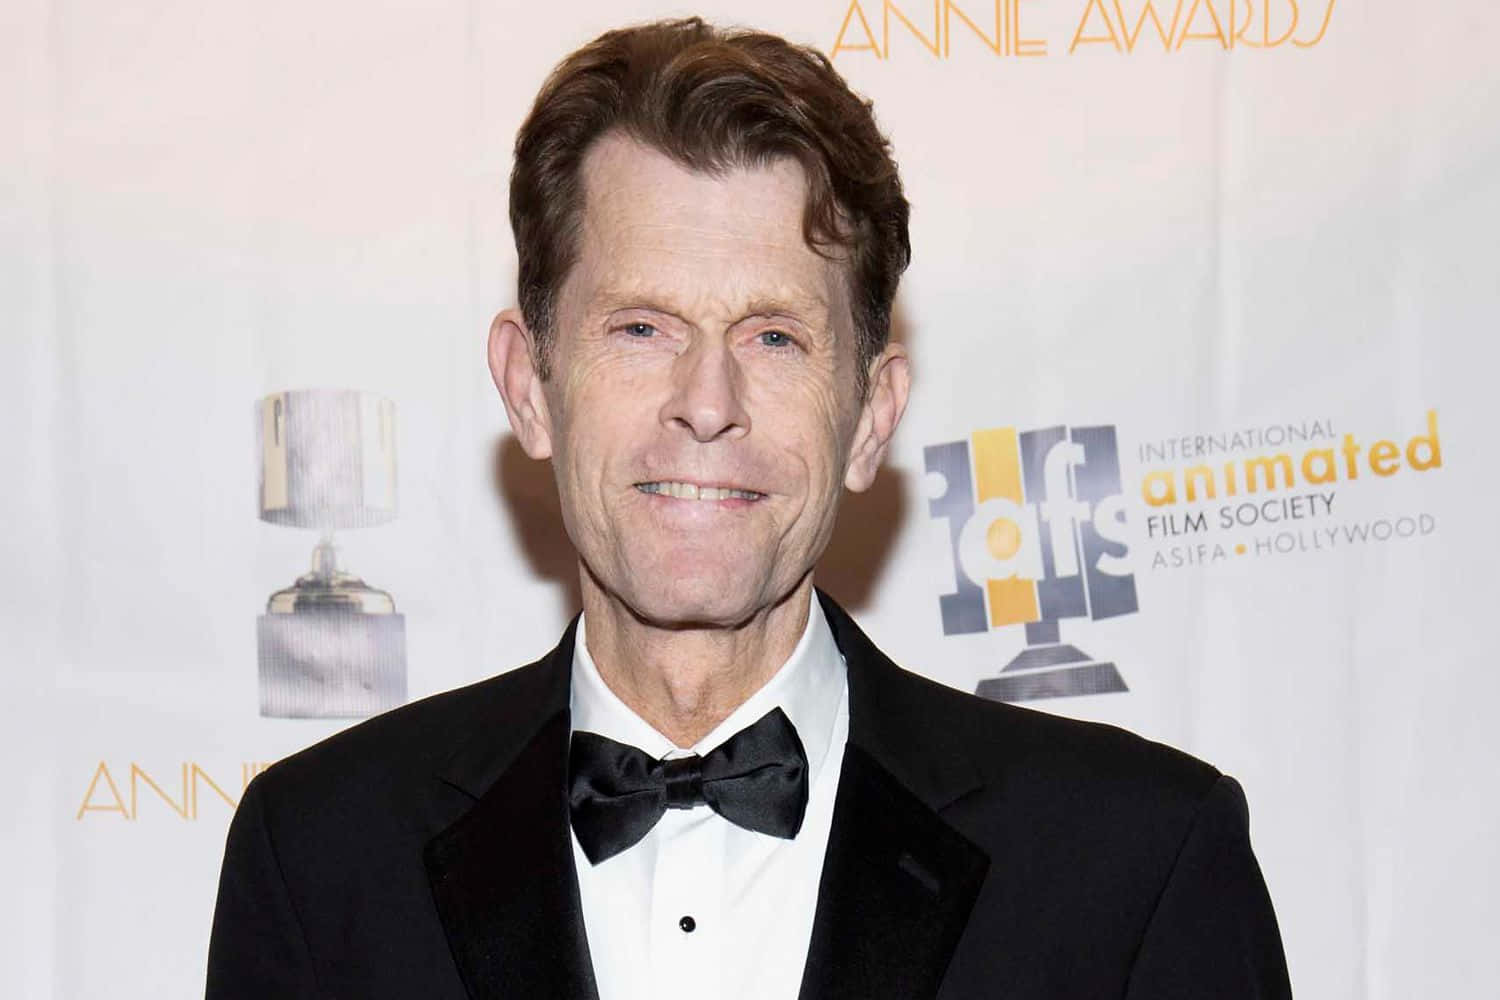 Kevin Conroy, the legendary voice actor, speaking at an event. Wallpaper